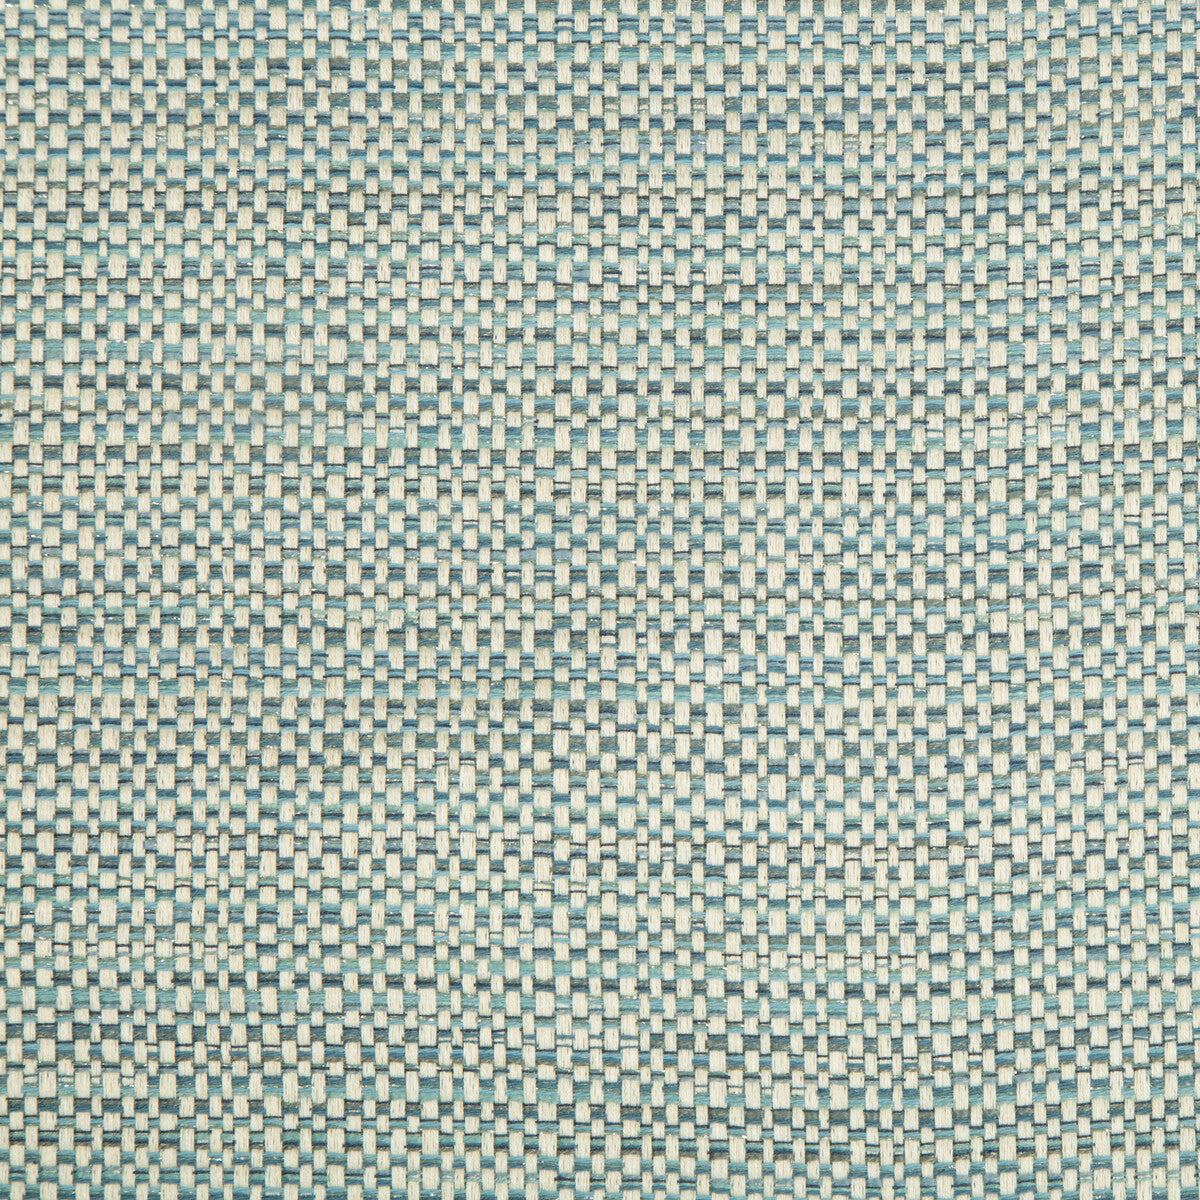 Kravet Design fabric in 34683-52 color - pattern 34683.52.0 - by Kravet Design in the Crypton Home collection